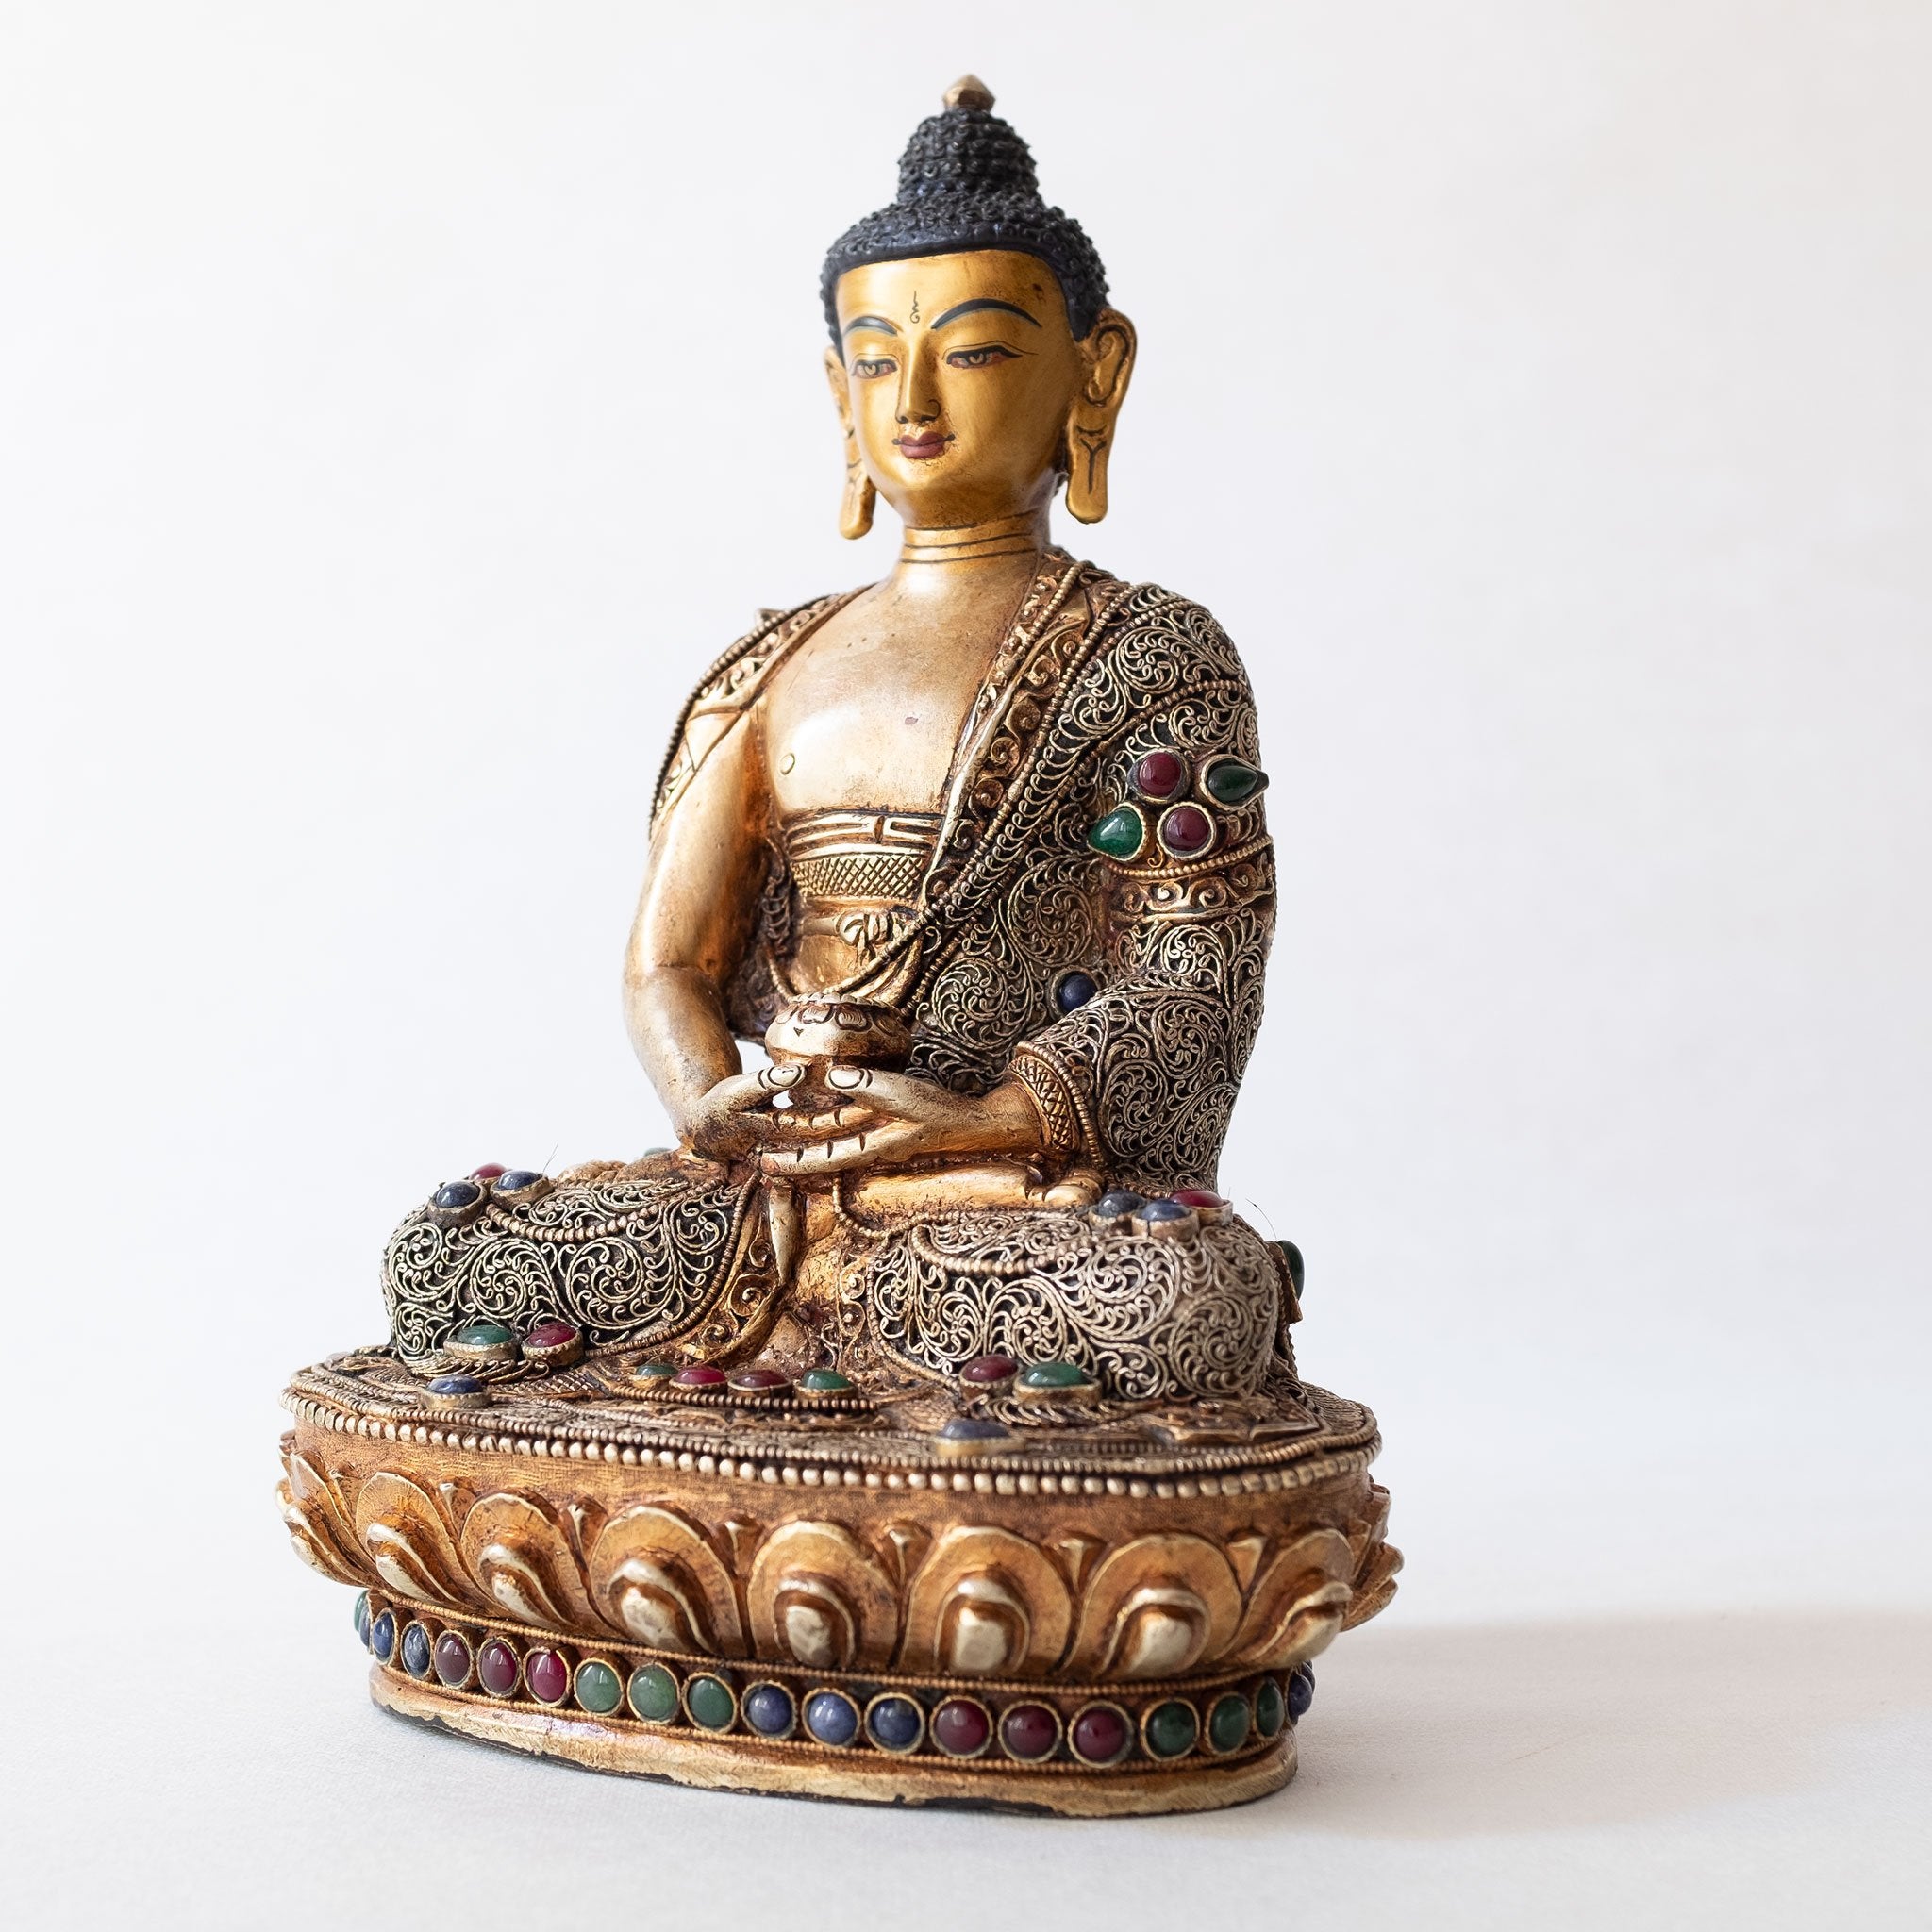 Amitabha Buddha Statue made of copper, lost wax casting, silver and gold plated, set with filigree and set synthetic gemstones in ruby red, emerald green, lapis lazuli blue. The face is set in gold. Handmade in Nepal